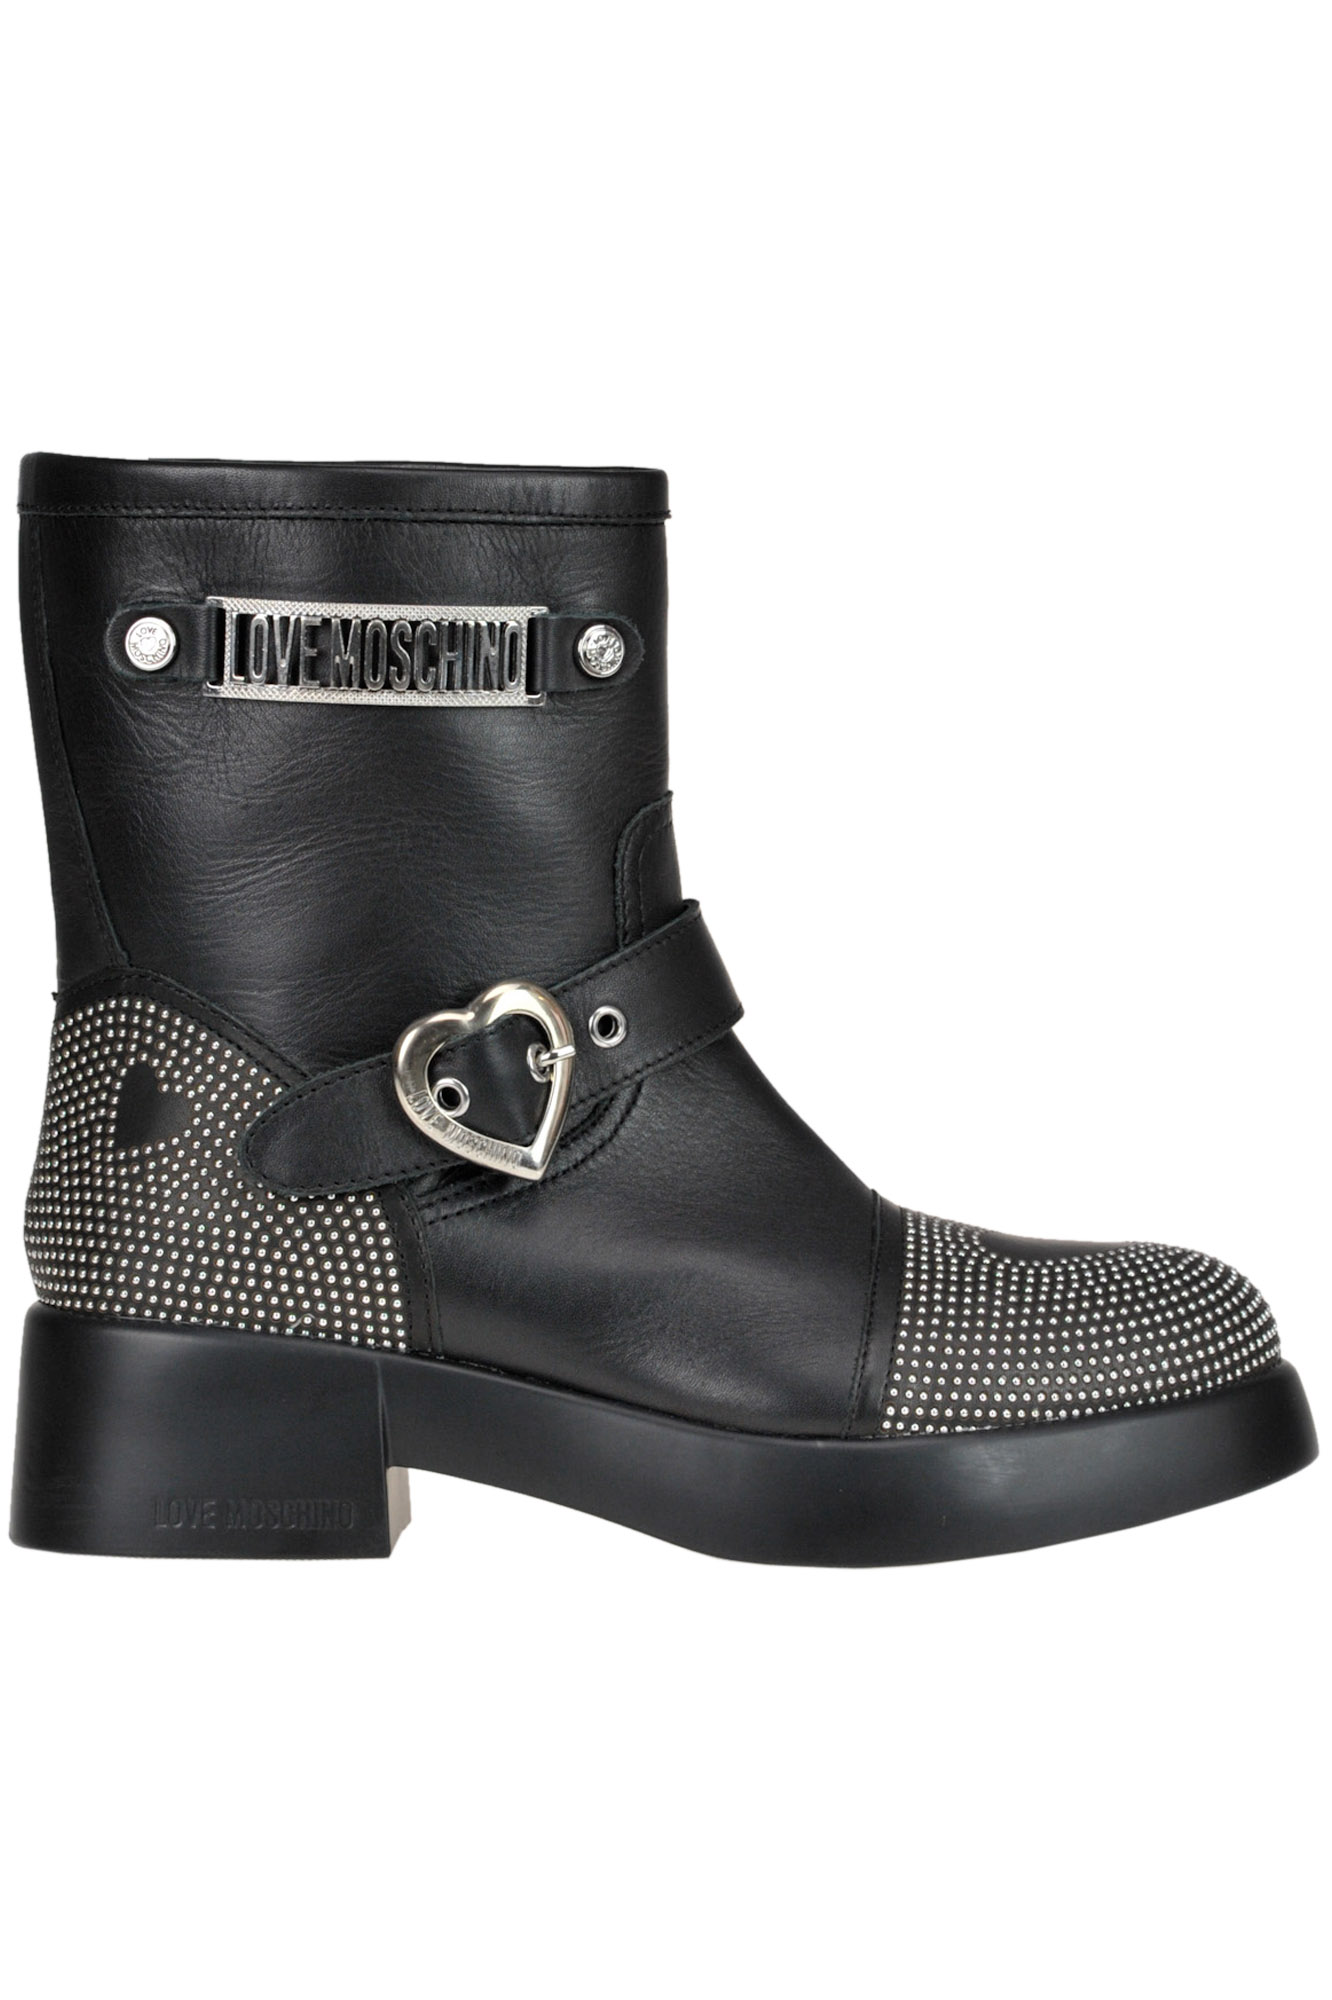 Love Moschino Studded Leather Biker Boots In Black